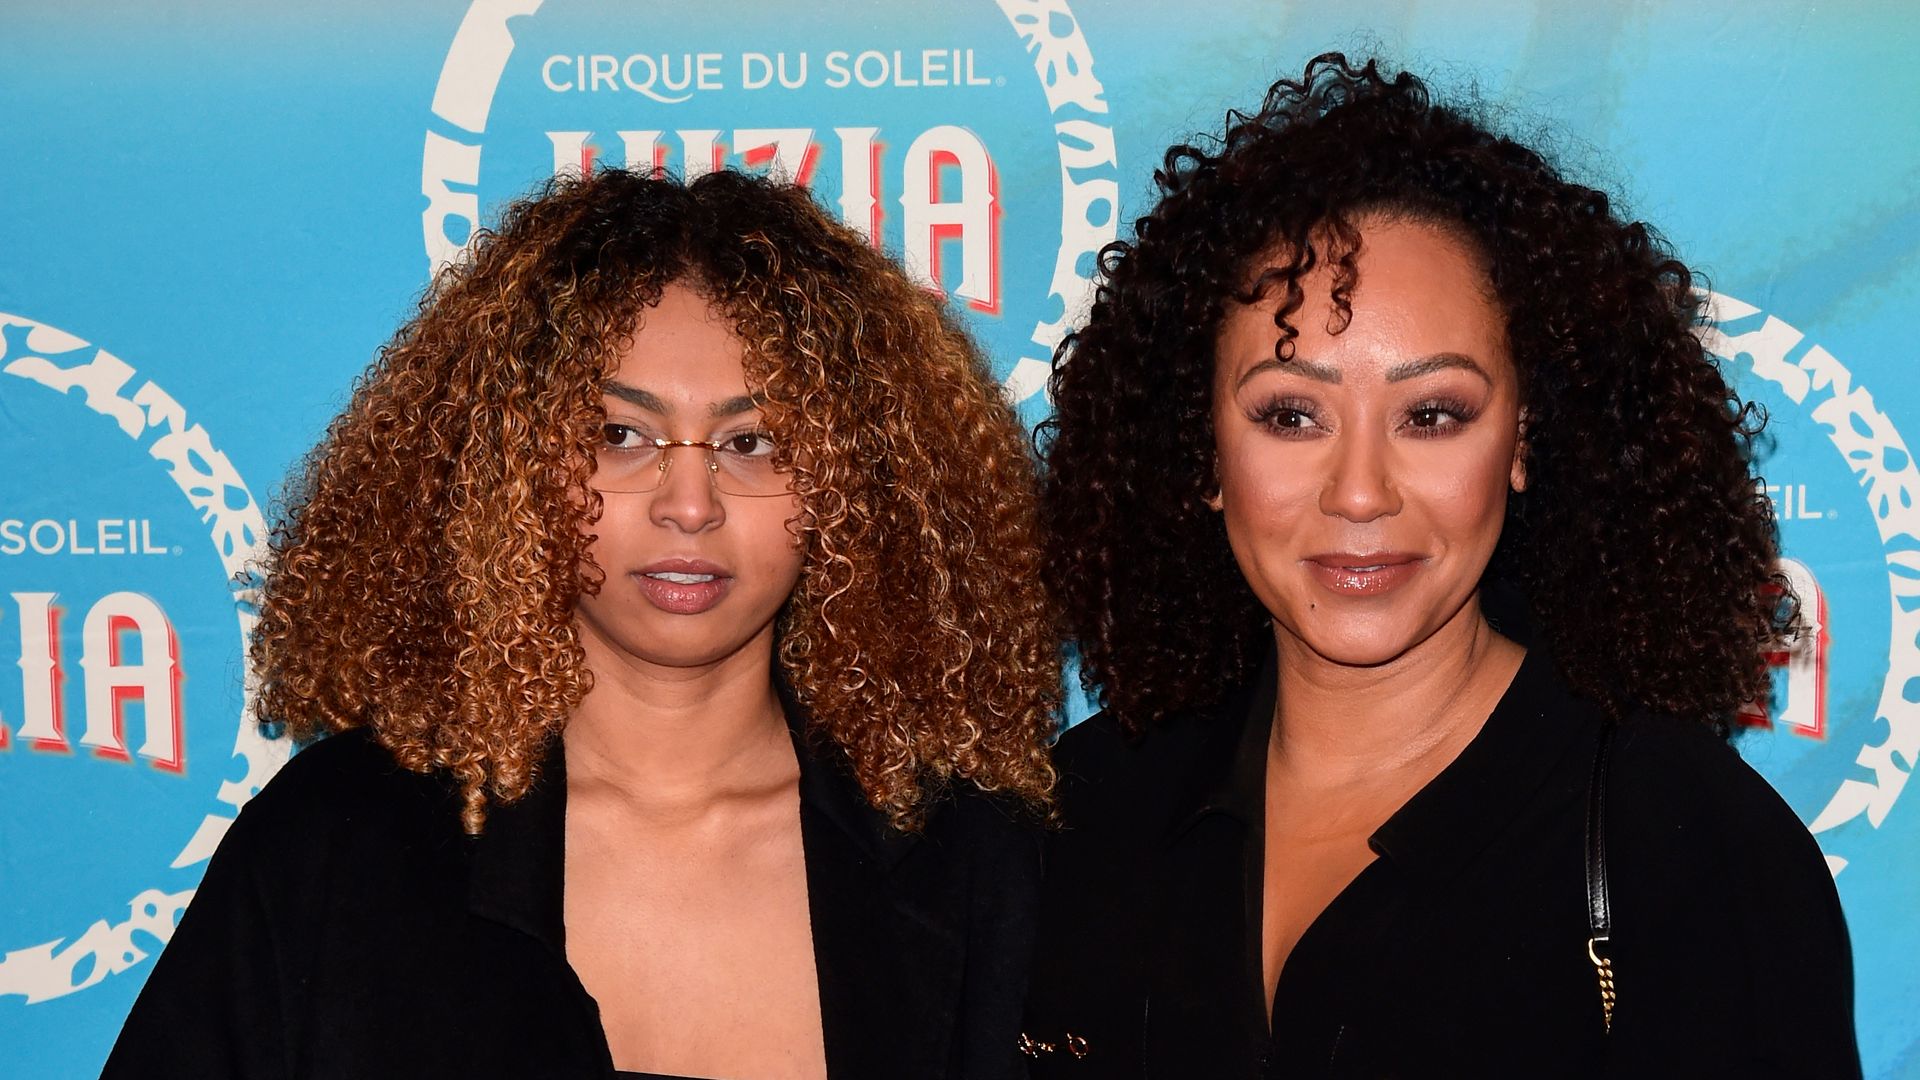 Phoenix Brown and Mel B on red carpet in black outfits